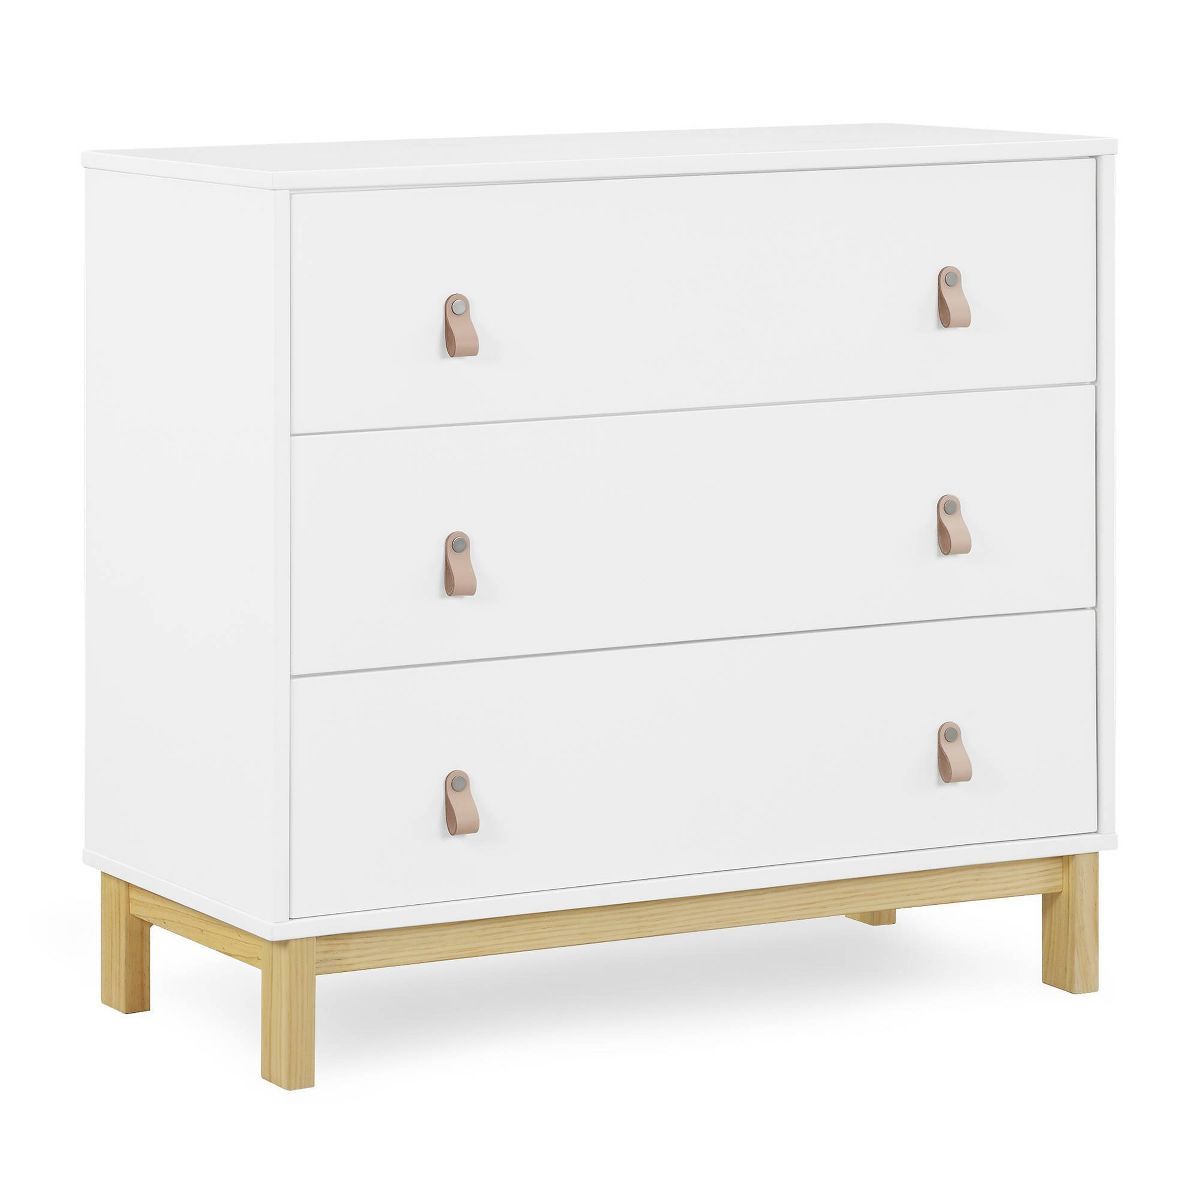 BabyGap by Delta Children Legacy 3 Drawer Dresser with Leather Pulls - Greenguard Gold Certified | Target